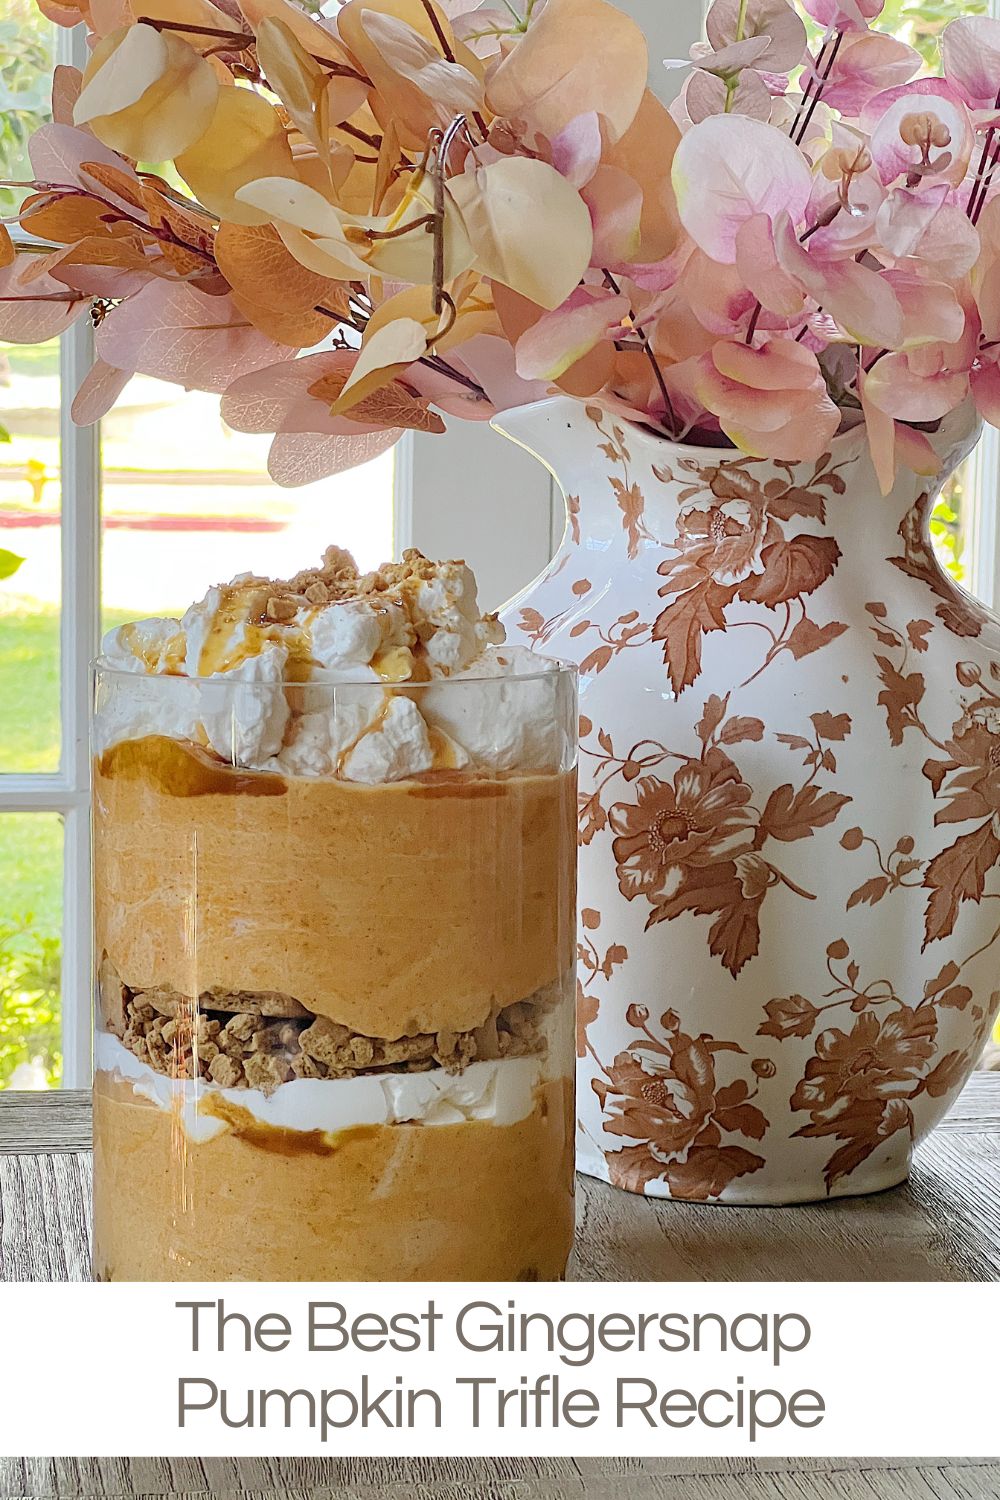 If you are looking for that perfect holiday dessert that's both delectable and visually stunning, this Gingersnap Pumpkin Trifle recipe is the best!